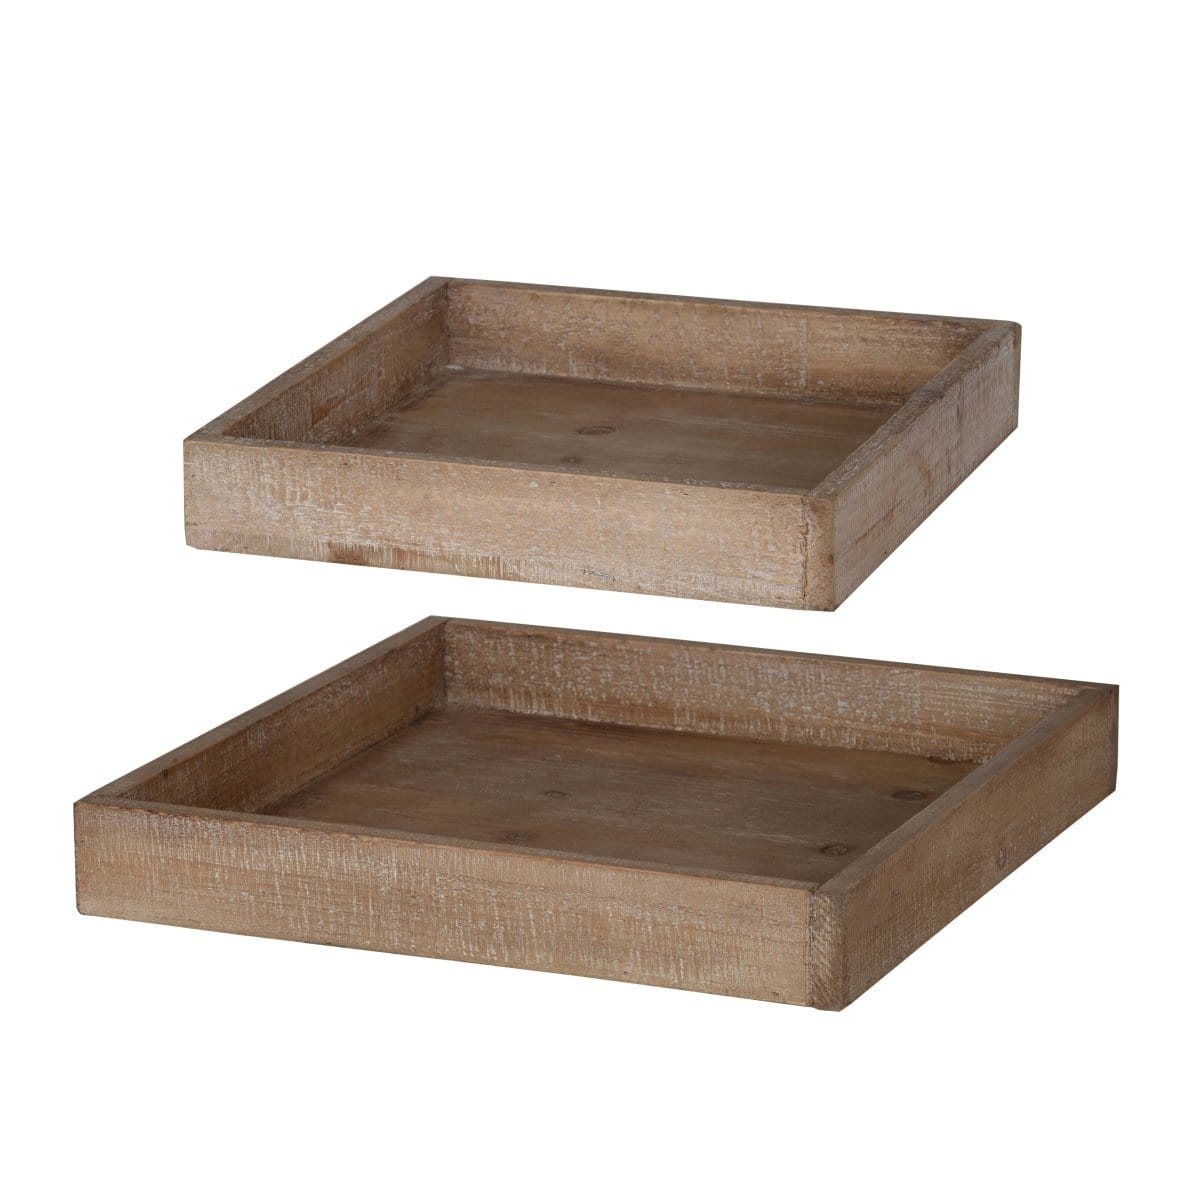 AB-HP42389 S/2 Sheridan Decorative Wooden Trays -Square picket and rail